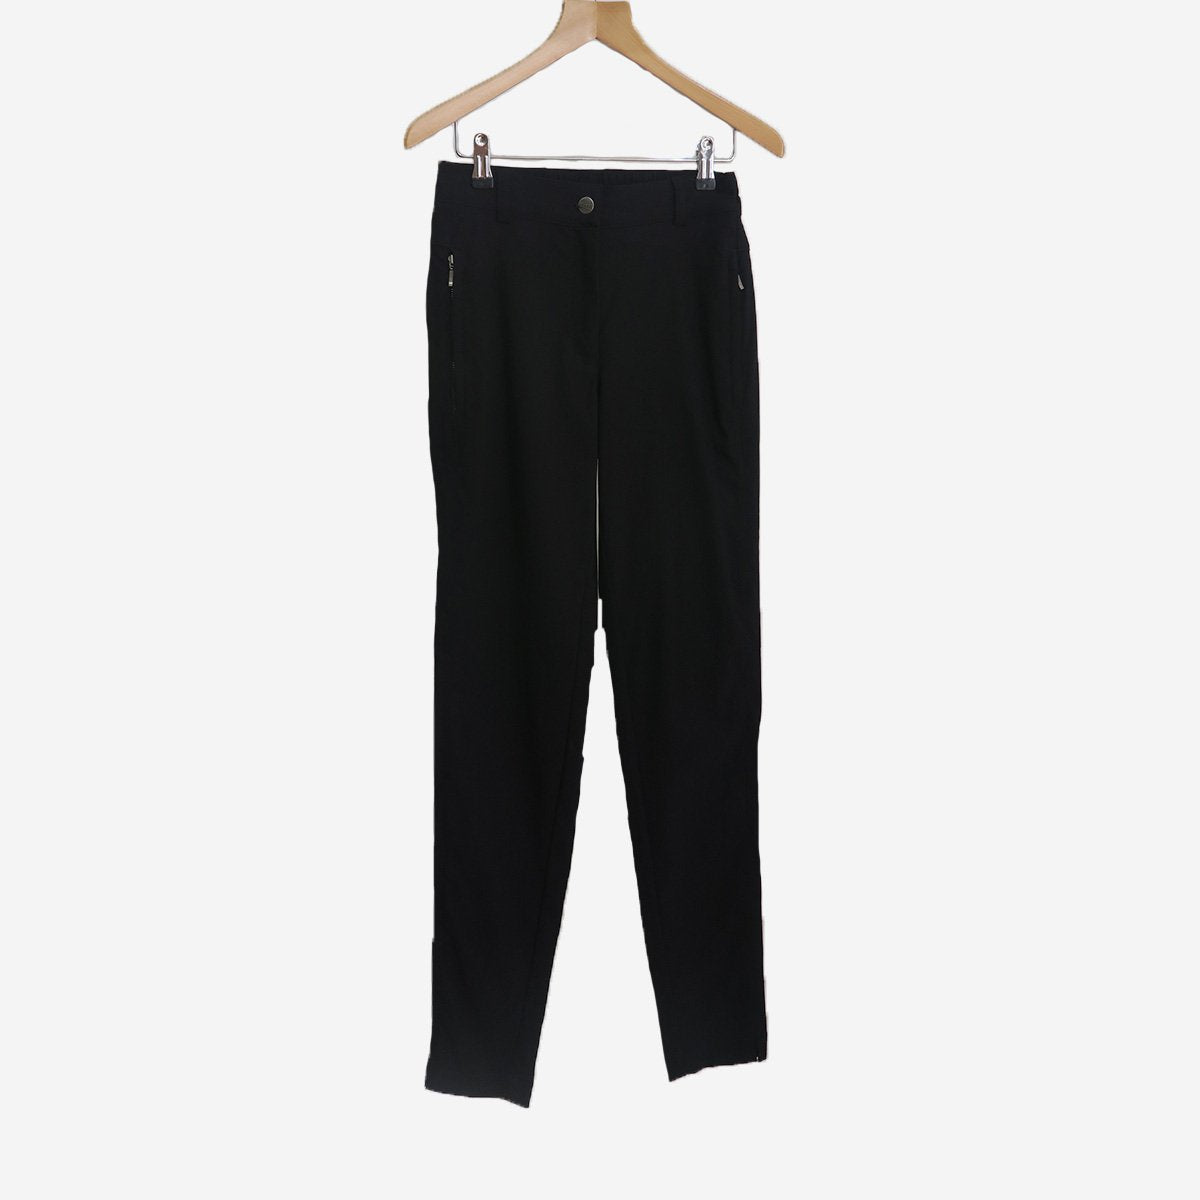 PETRUSKA FITTED TROUSERS